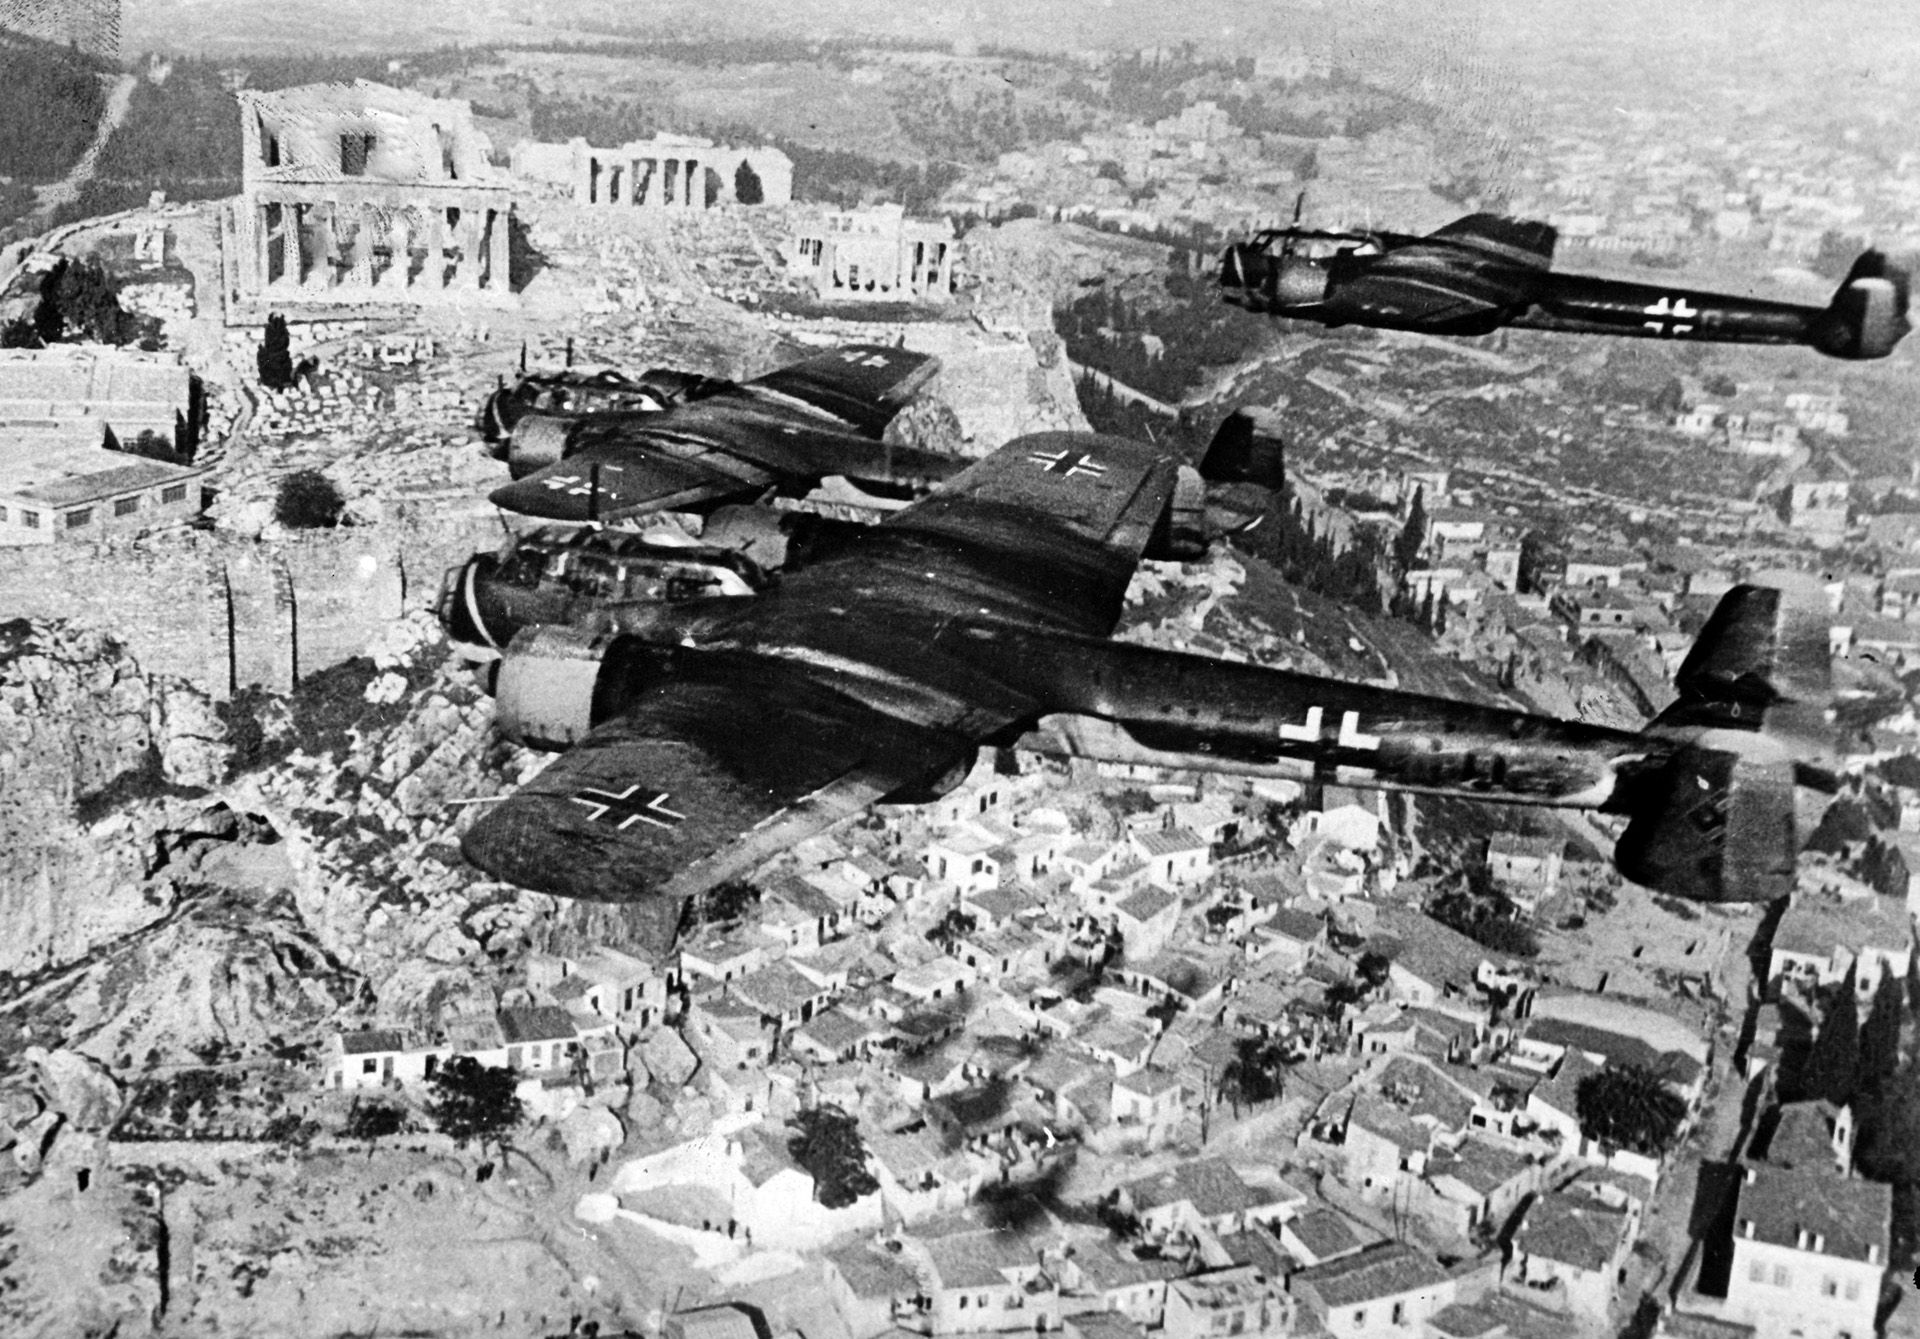 In this 1941 photograph, a flight of Luftwaffe twin-engine Dornier Do-17 bombers flies above the Acropolis in Athens, Greece. The German armed forces were dispatched to Greece initially to salvage a deteriorating situation caused by the ill-advised Fascist Italian invasion of the country.